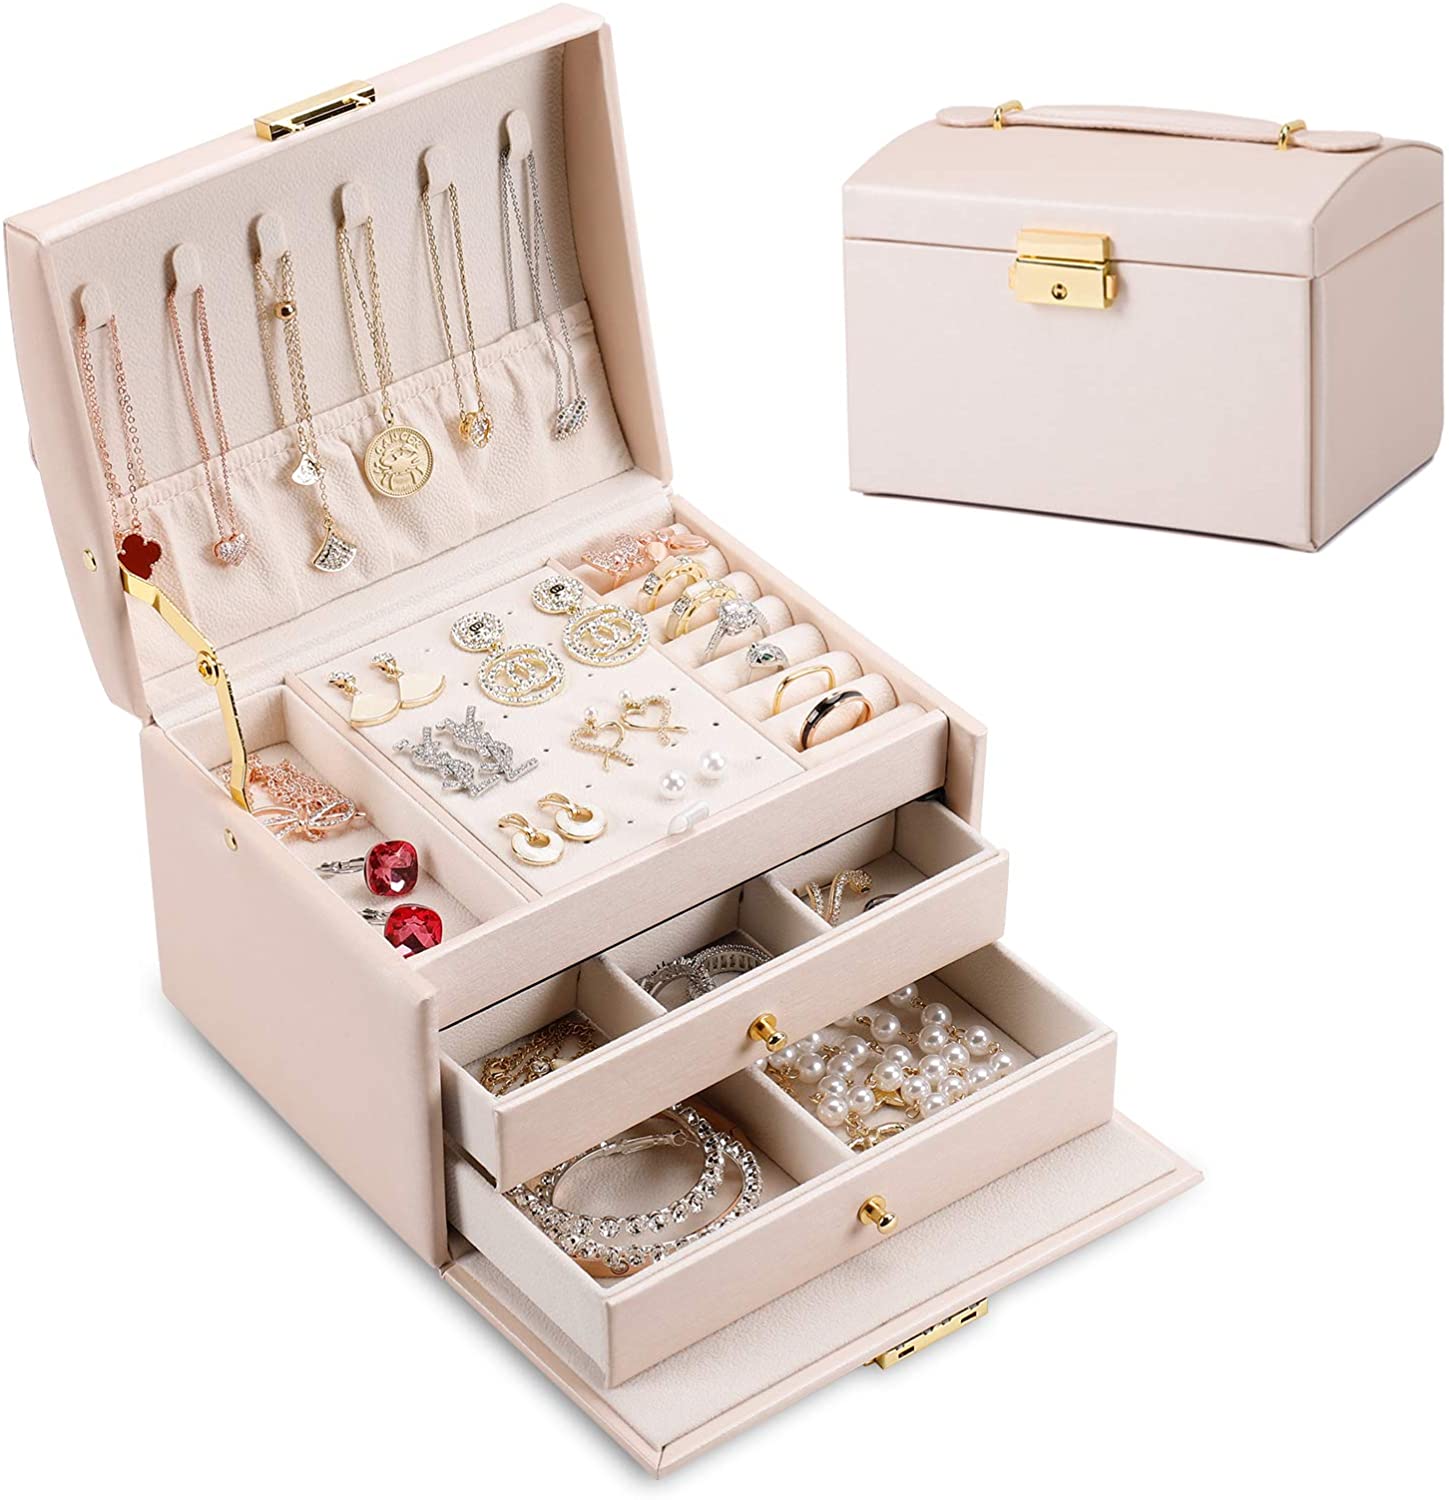 Jewellery Box Organiser Small Travel PU Leather Jewelry Storage Case Pink Jewellery Box Organiser for Women,2 Layers Removal Tray Jewelry Storage Case with Necklace Hangers 